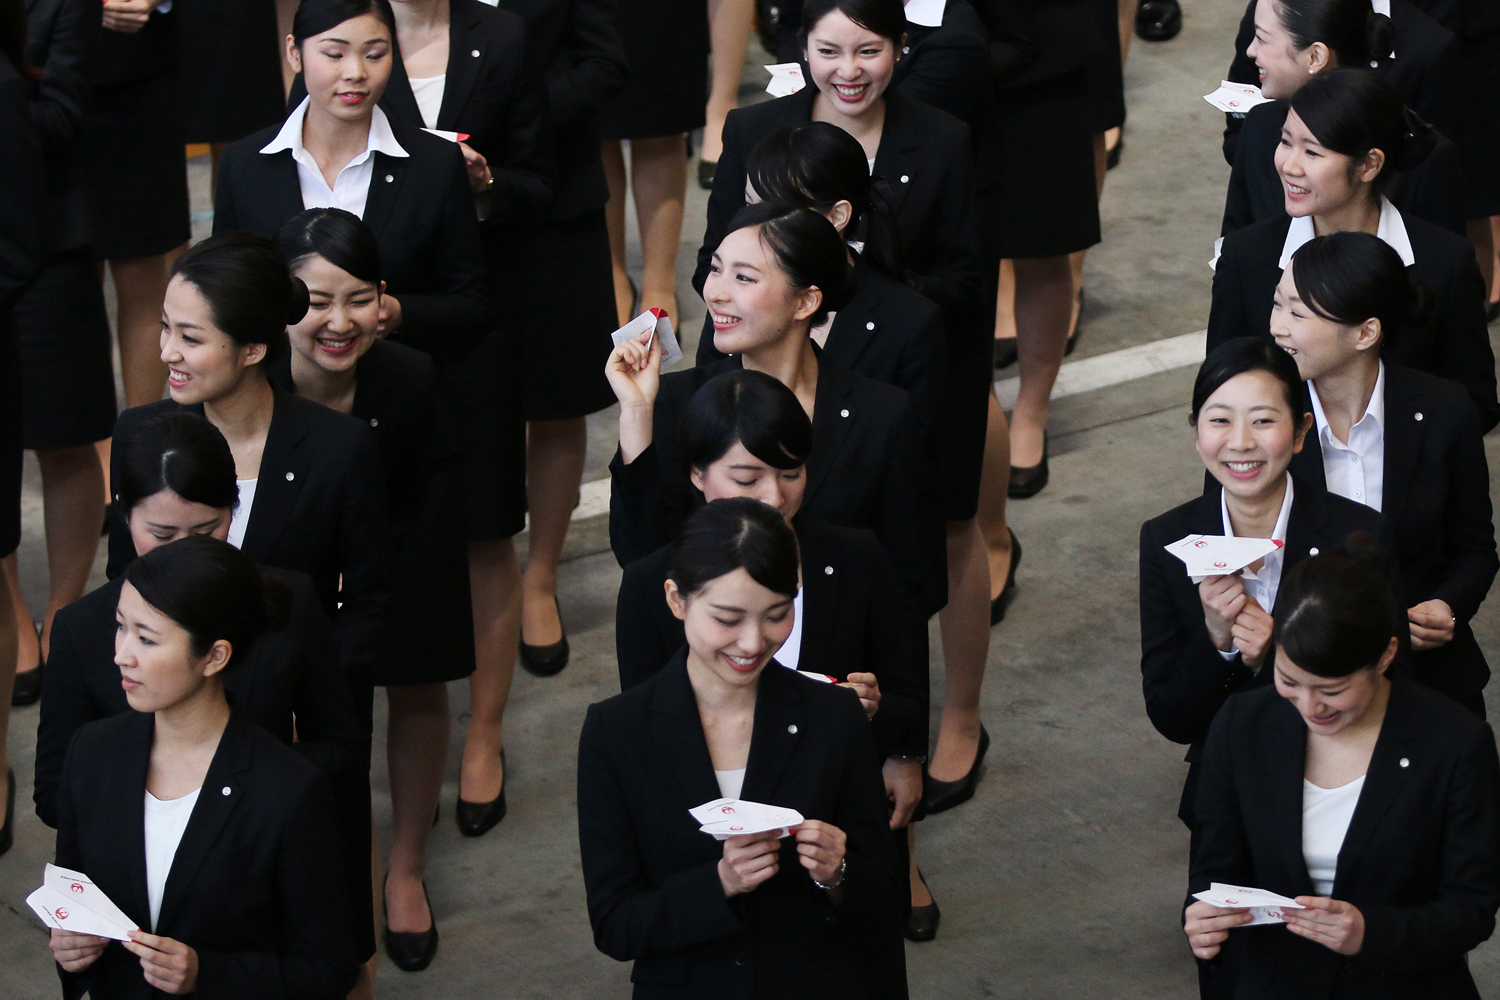 New employees to Japan Airlines Company prepare to release paper planes during a welcoming ceremony at the company's hangar near Haneda Airport in Tokyo on April 1, 2014.